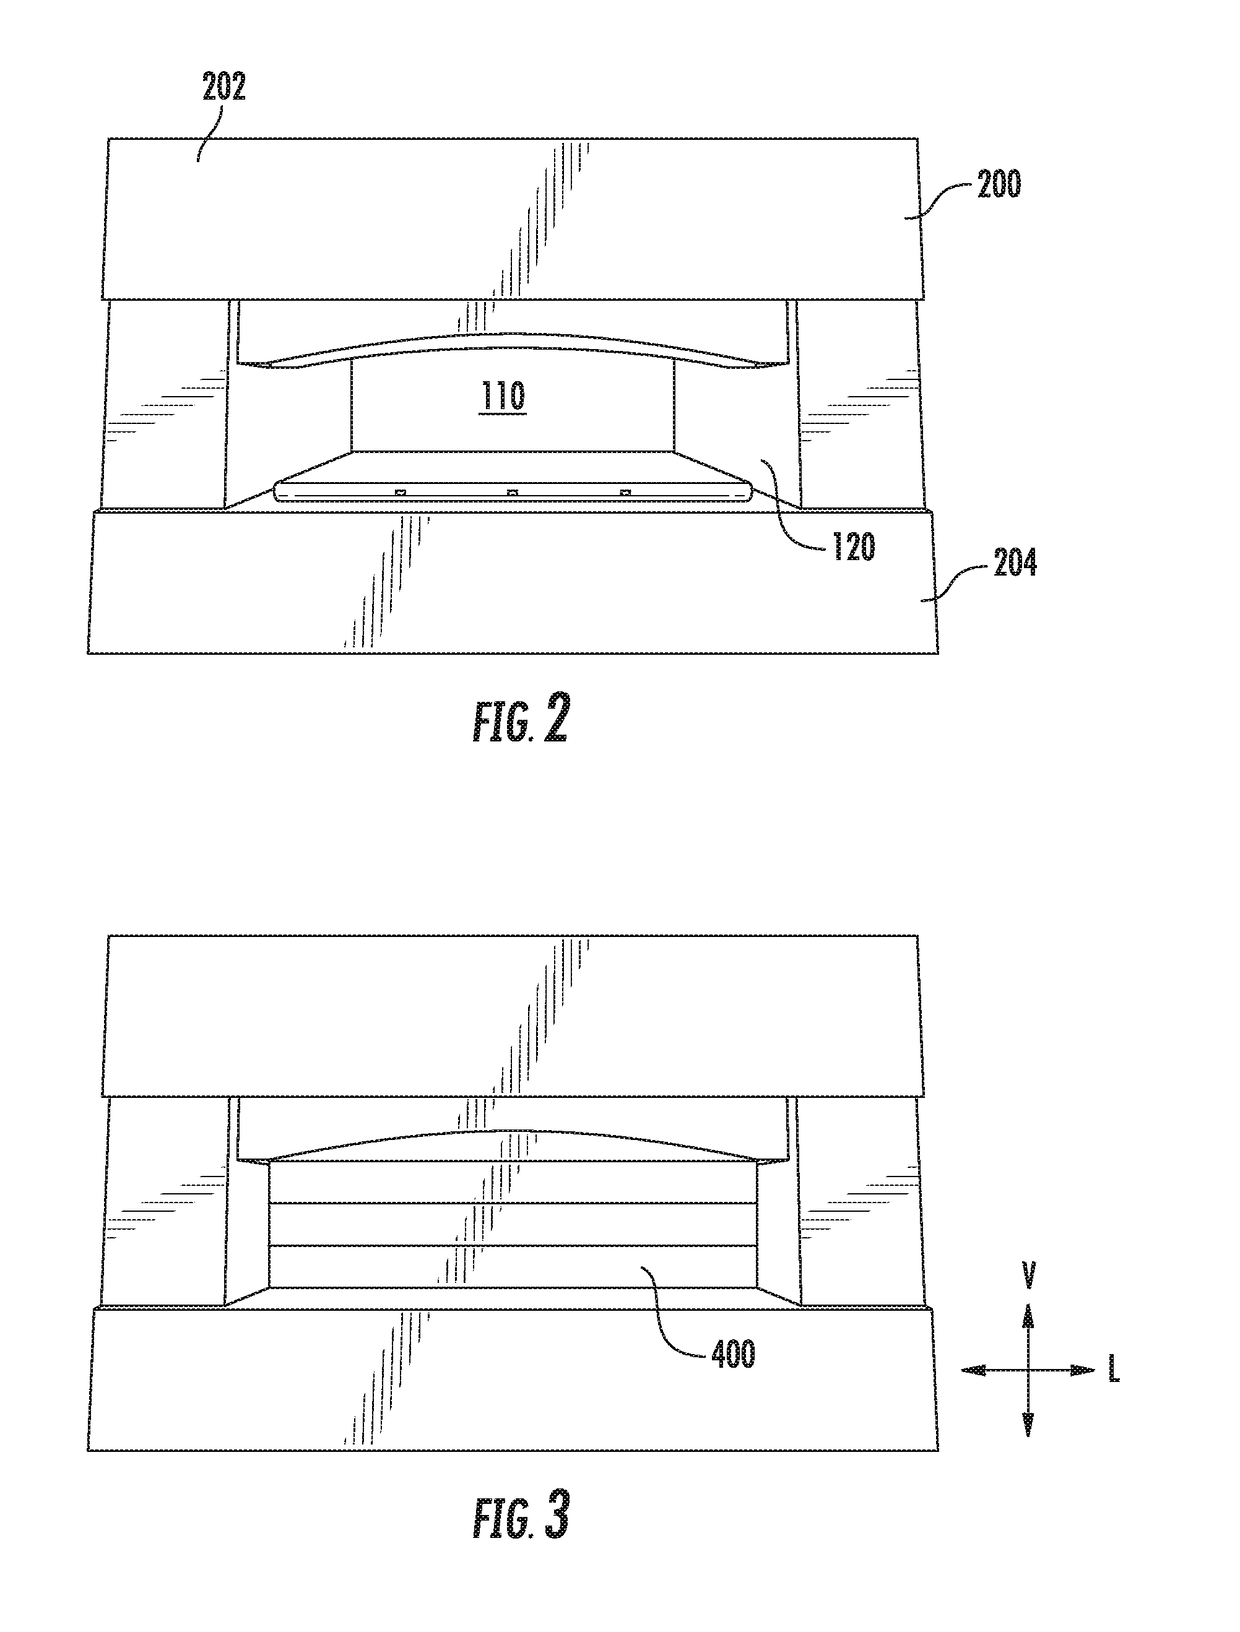 Oven appliance with an air flow restriction door